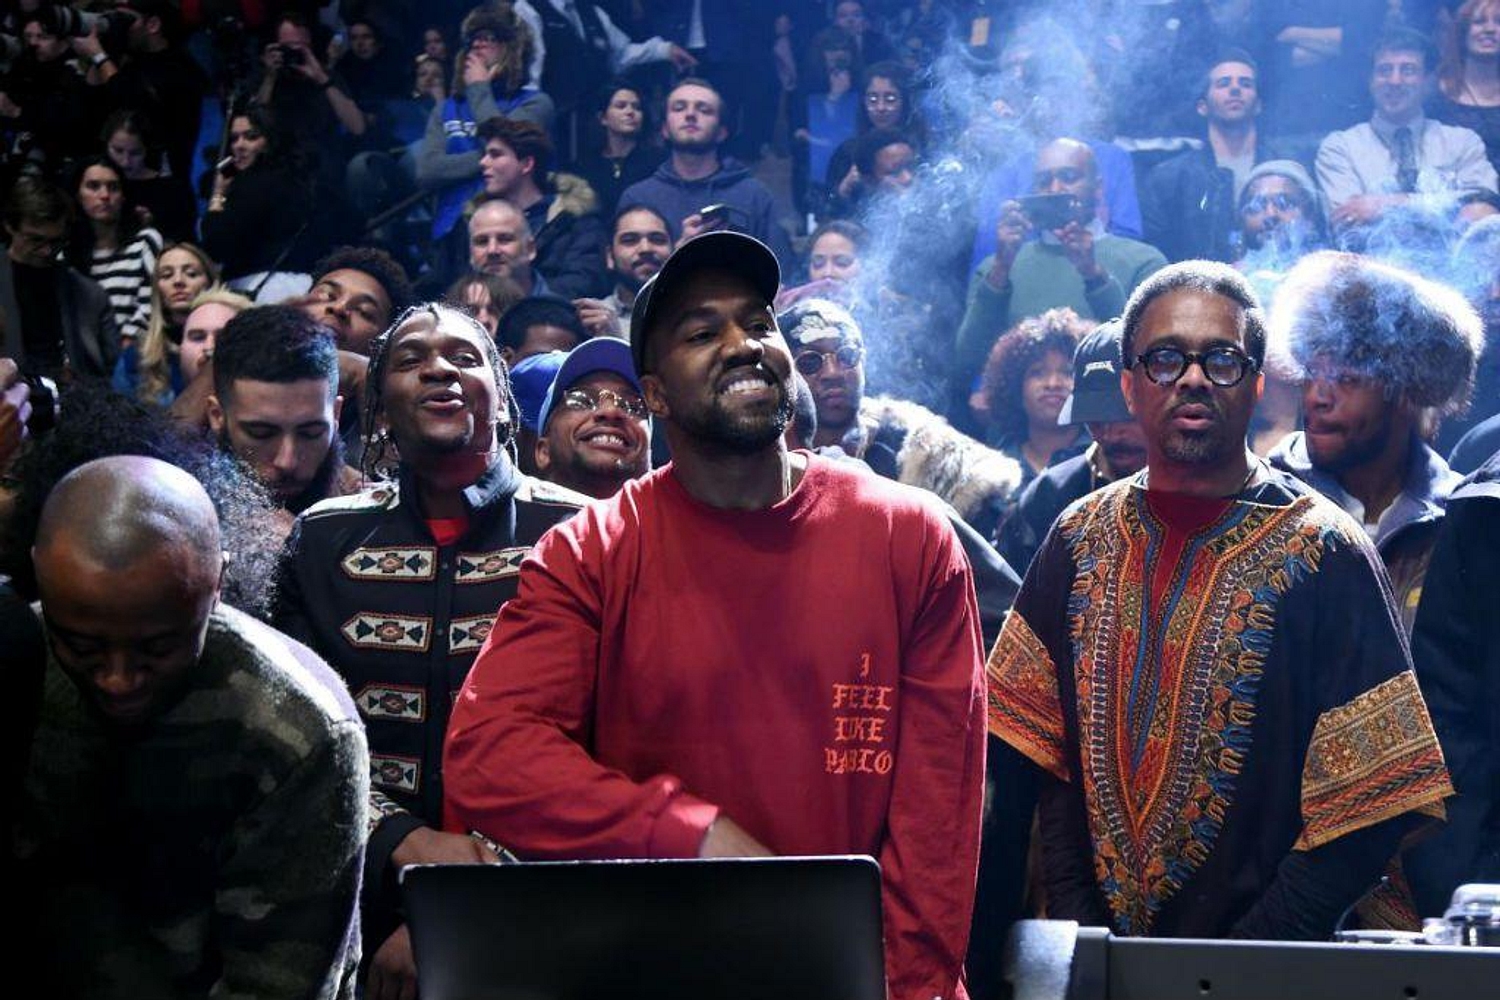 Kanye West hospitalised “for his own health and safety”